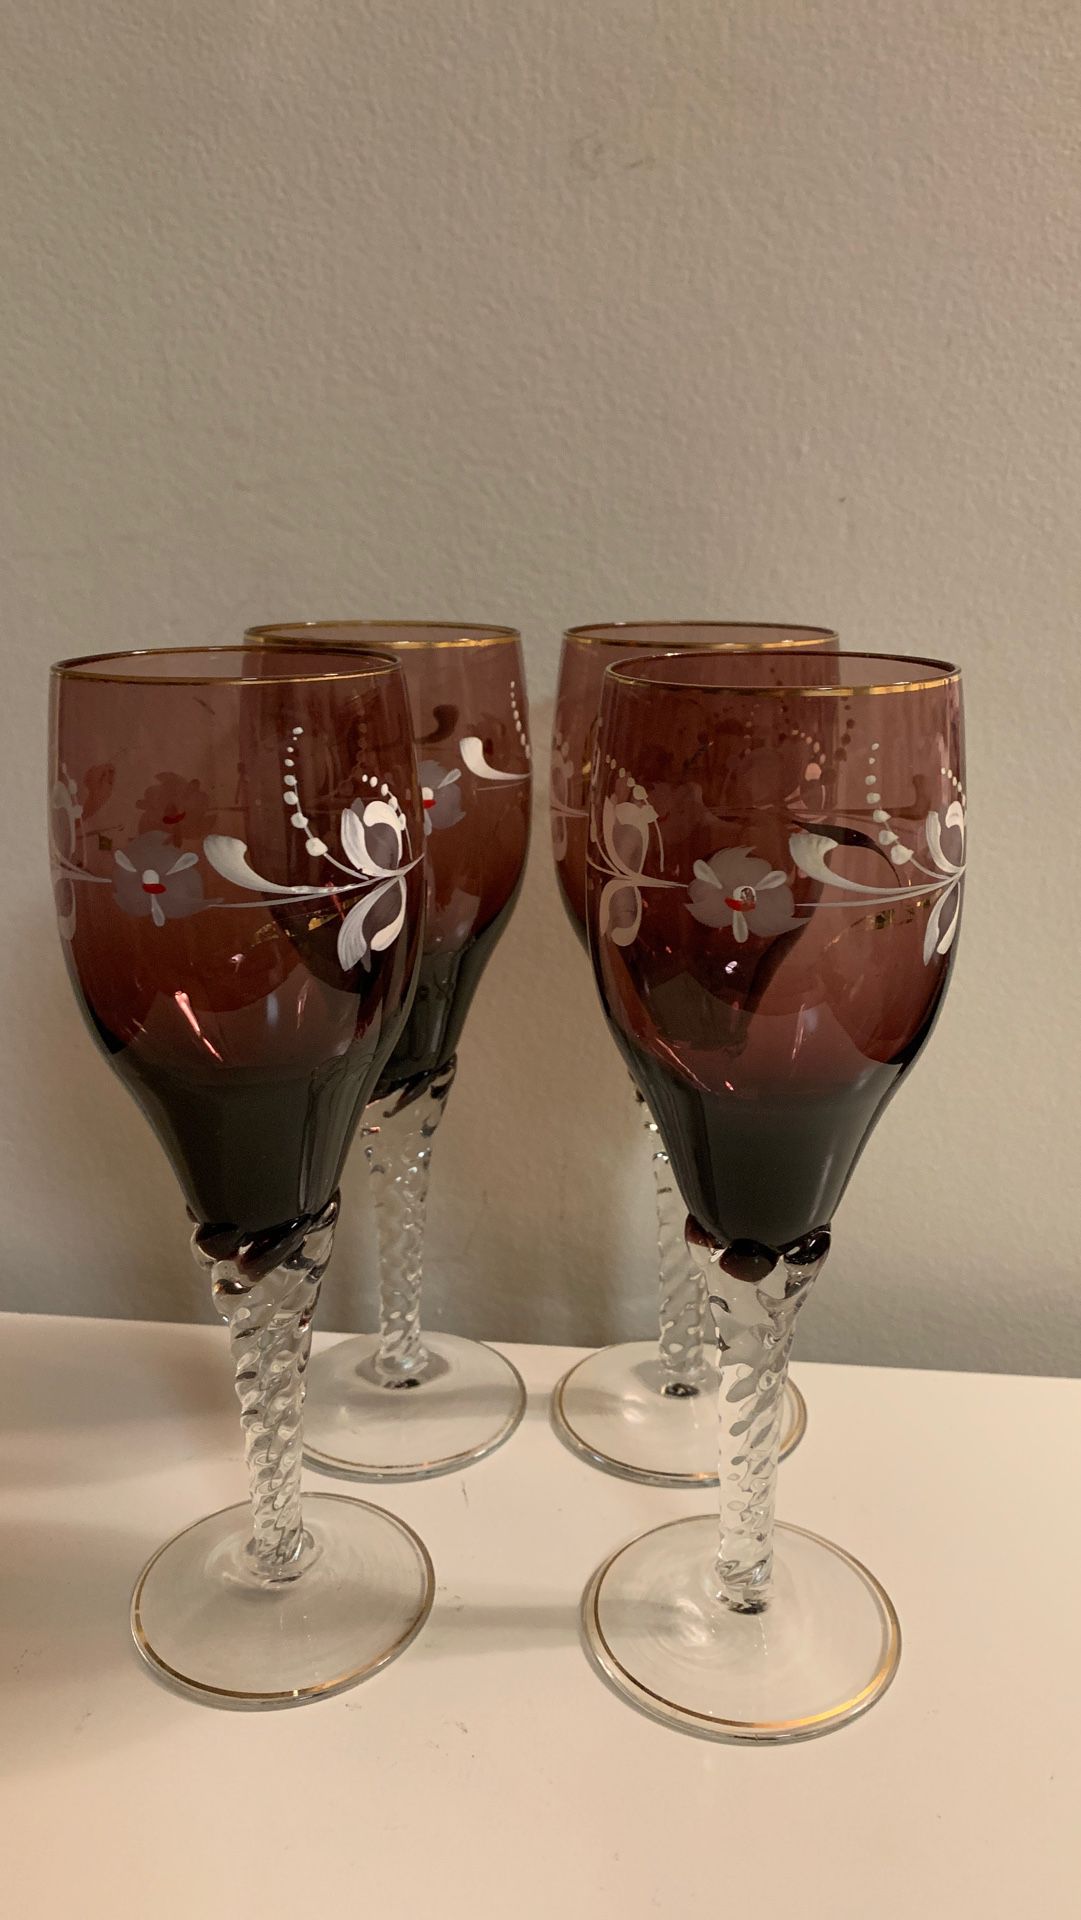 4 pcs of vintage hand painted wine glass